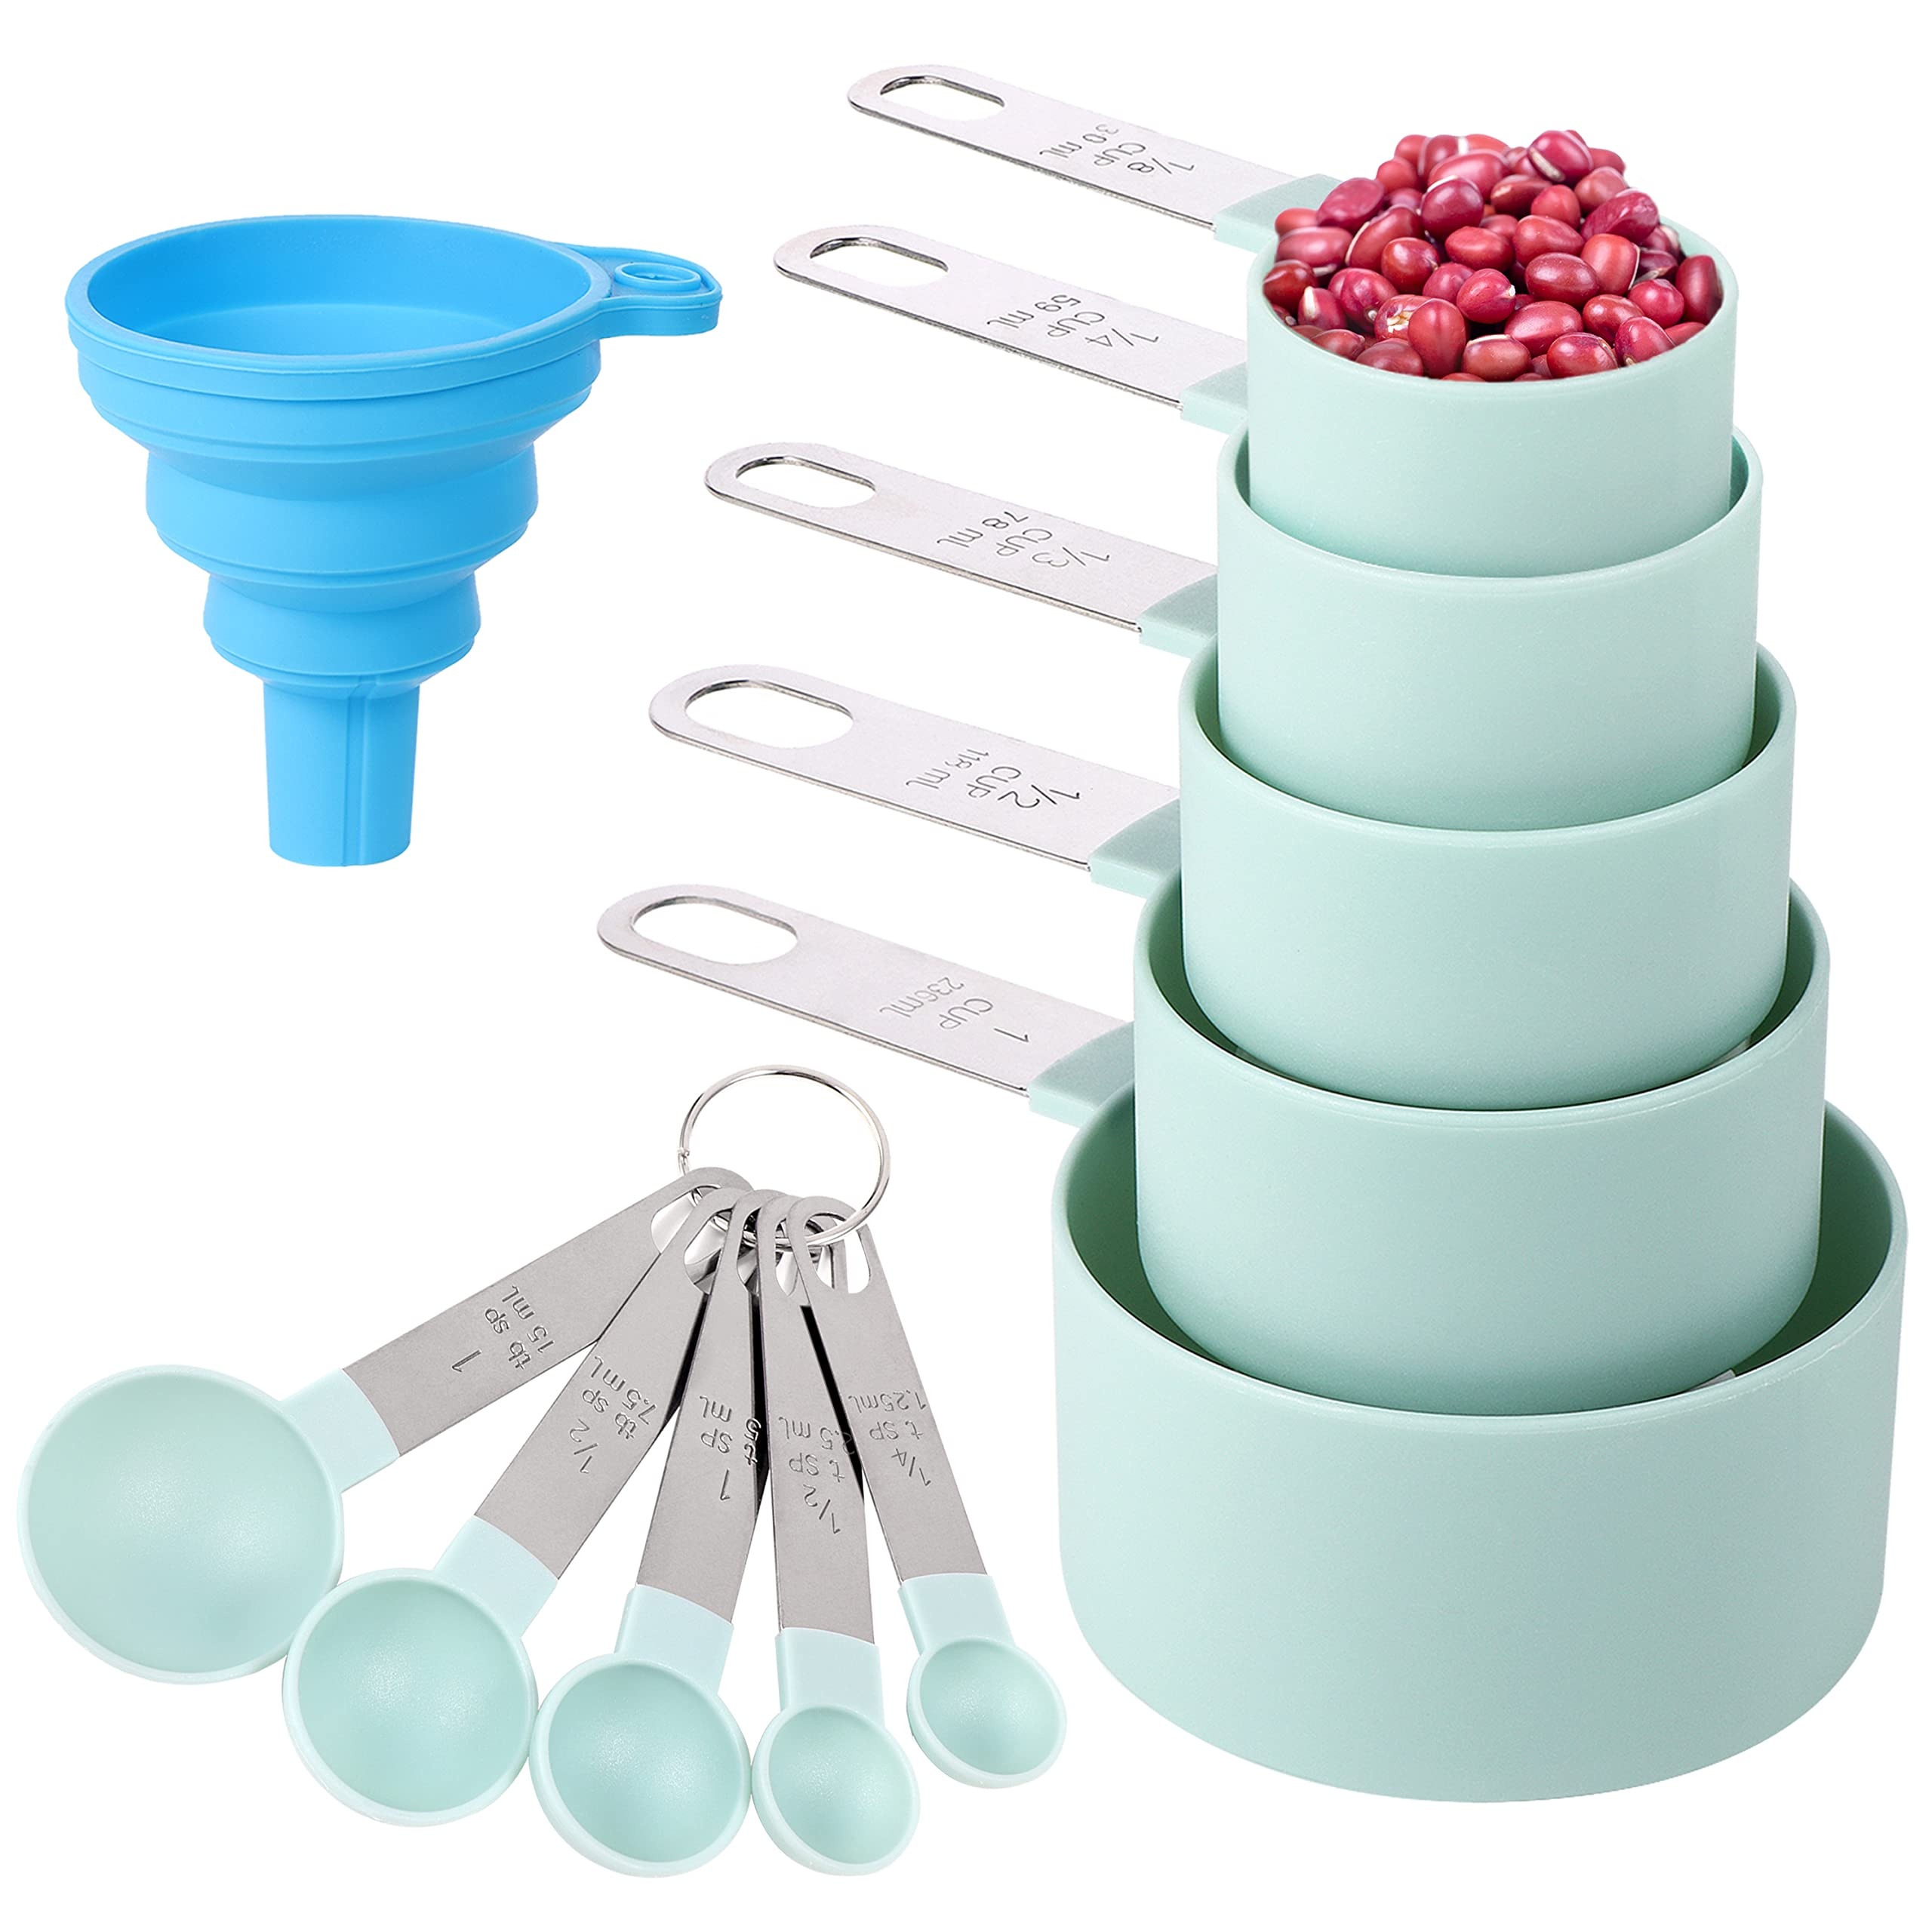 werpower Measuring Cups and Spoons Set of 8 Pieces,Nesting Measure Cups with Stainless Steel...